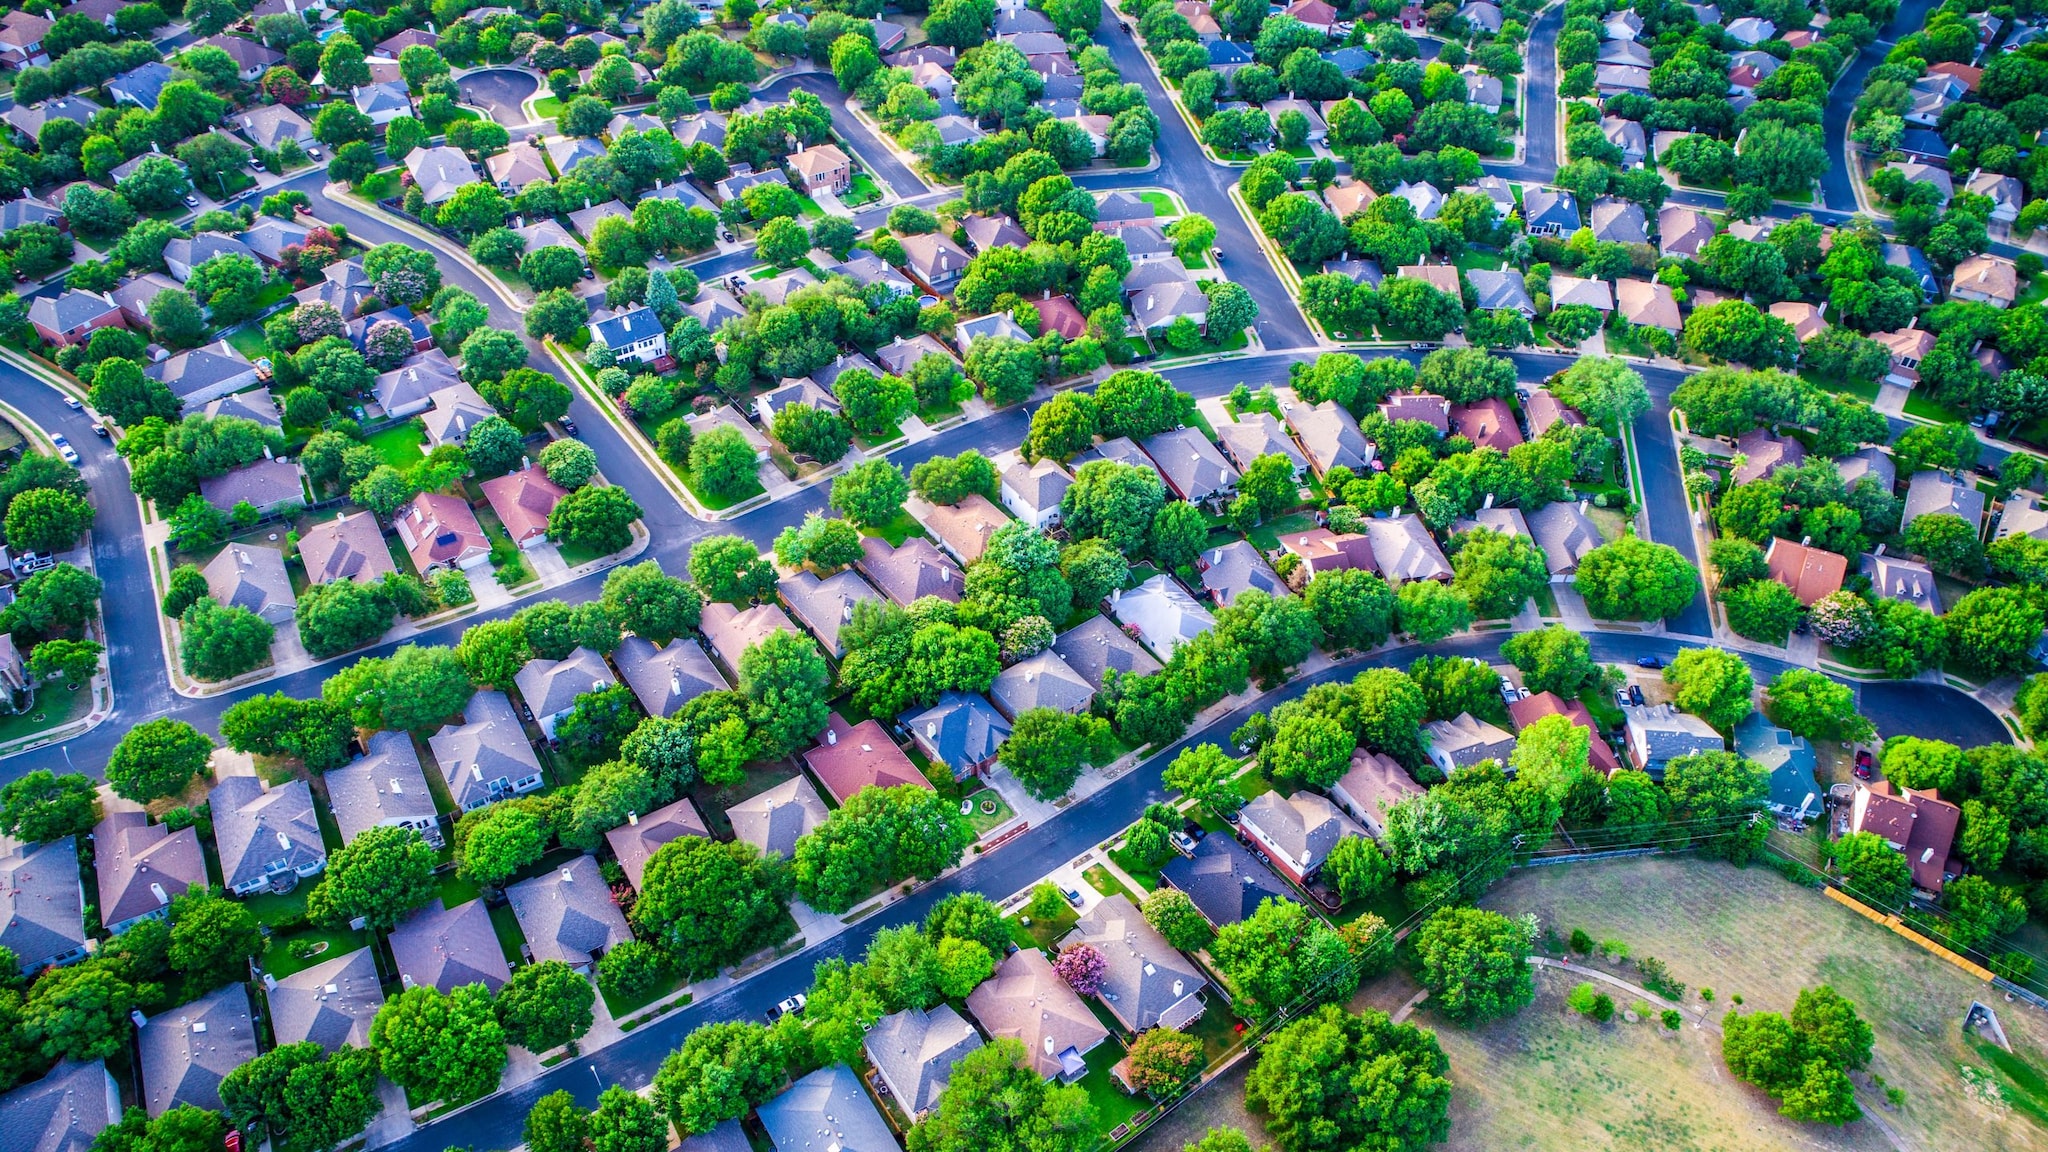 Aerial view of a neighborhood with many houses and trees.